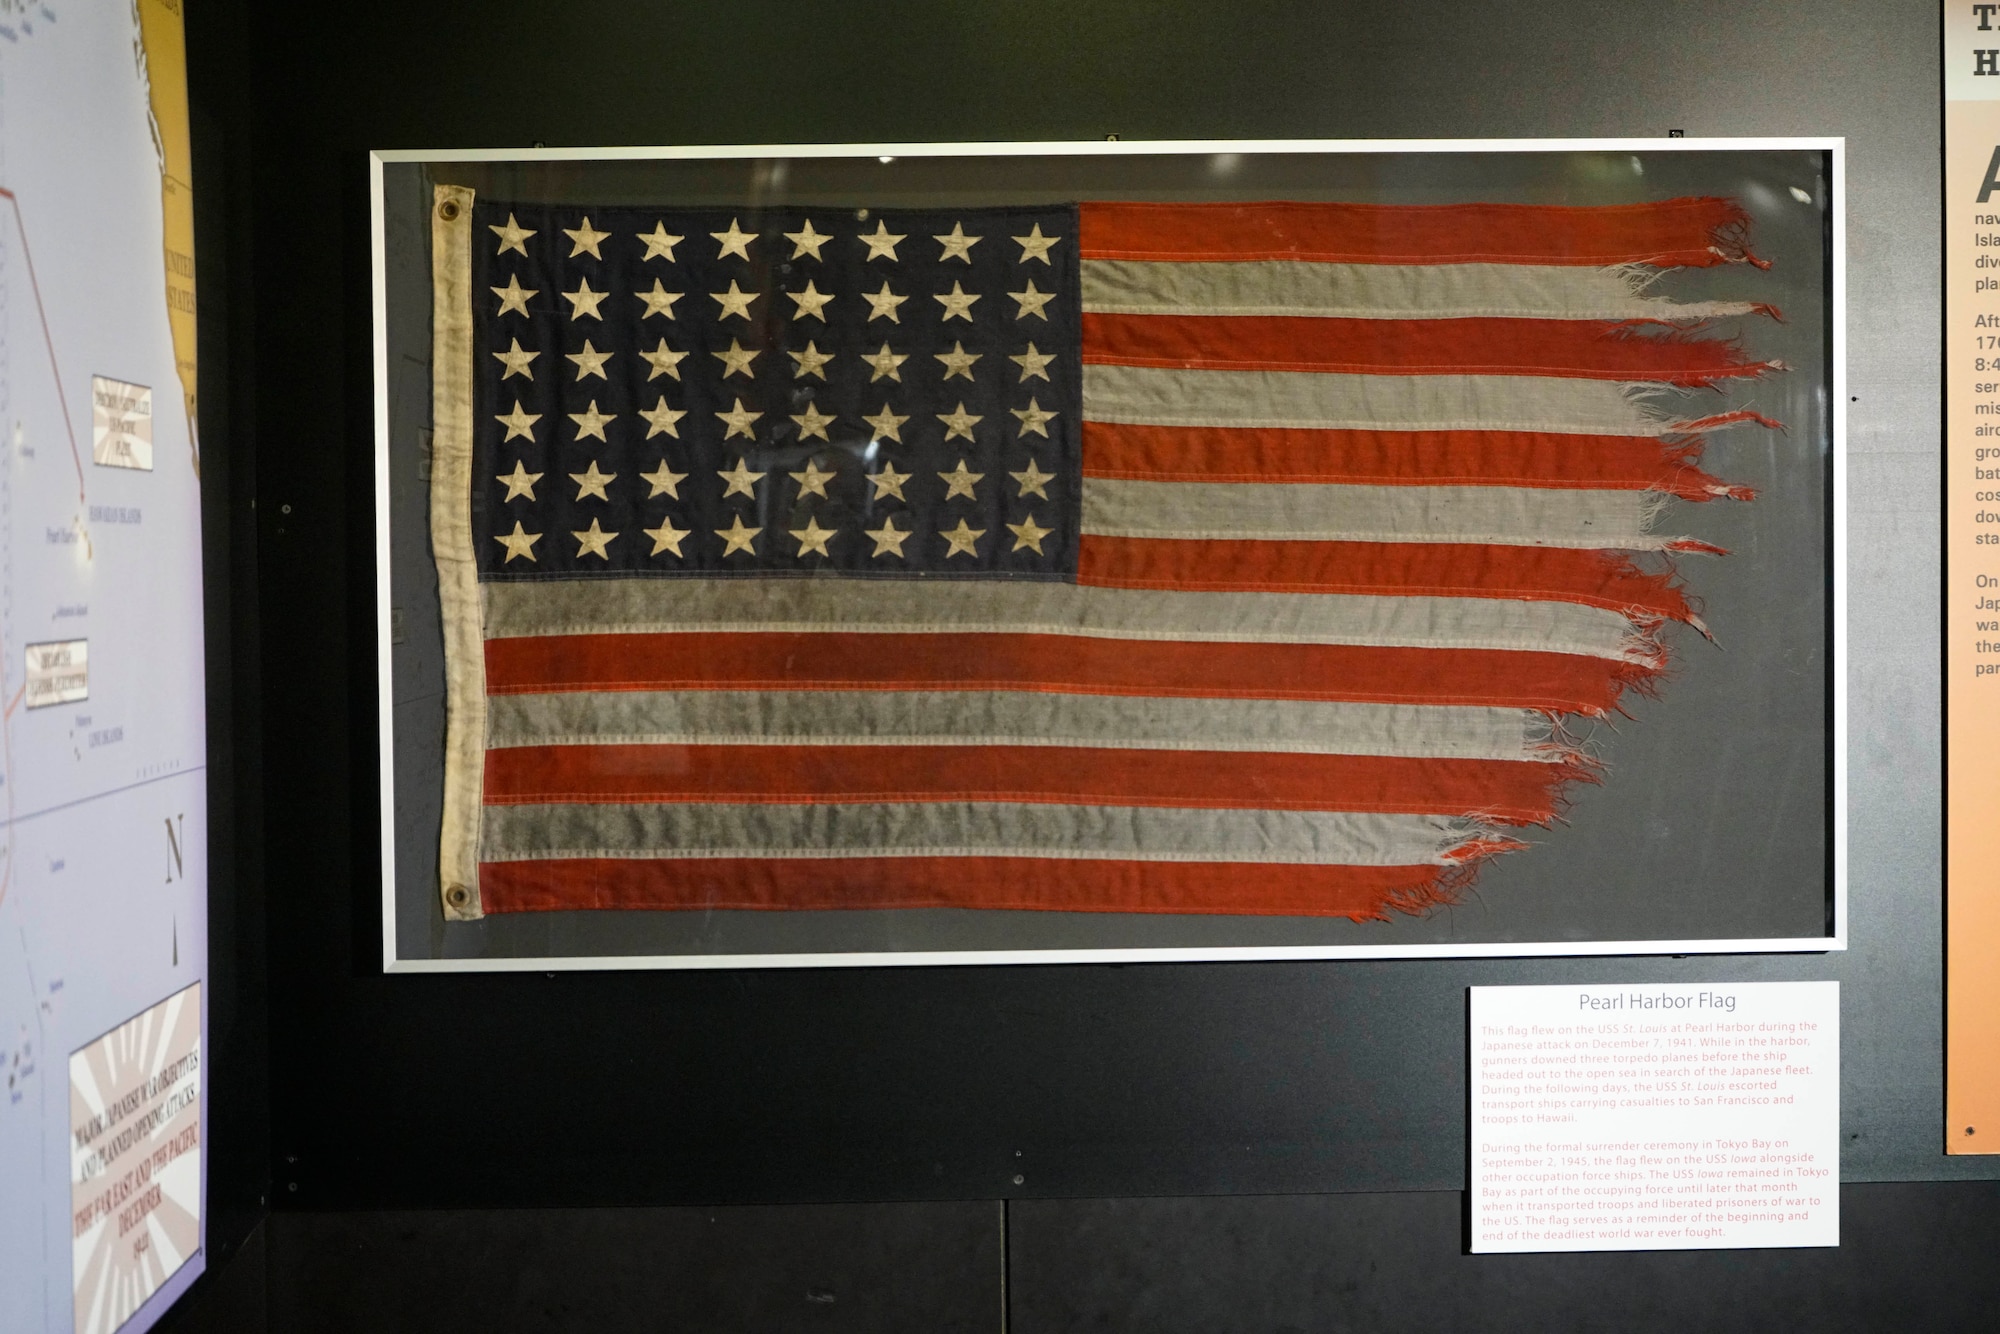 This flag was flown on the U.S.S. St. Louis at Pearl Harbor on Dec. 7, 1941, the day of the Japanese attack